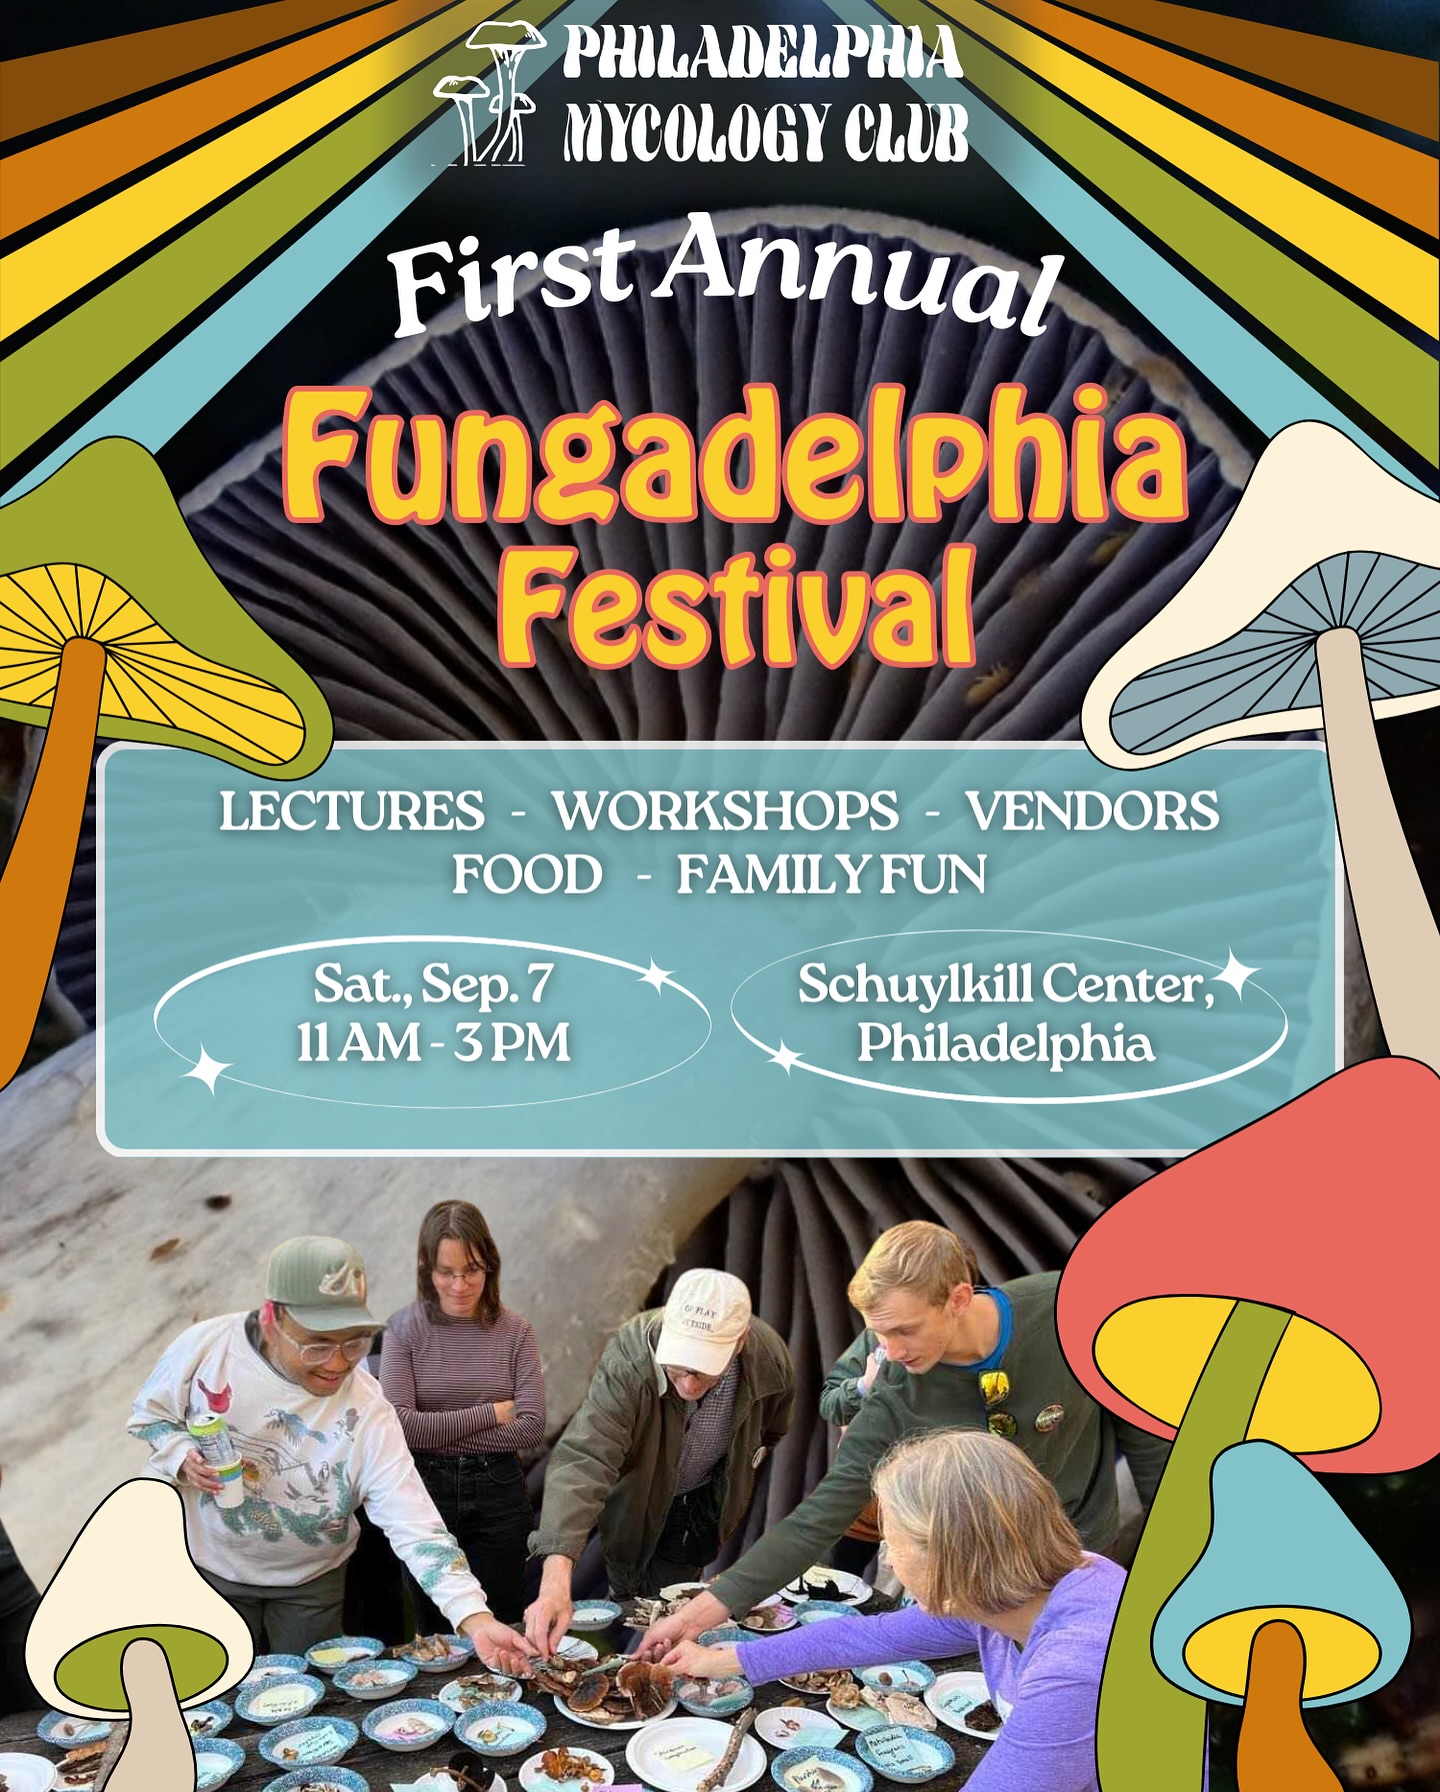 Flyer with illustrations of mushrooms, a photo of 5 people, examining mushrooms in paper bowls, and the following text: Philadelphia Mycology Club First Annual Fungadelphia Festival LECTURES - WORKSHOPS - VENDORS - FOOD - FAMILY FUN Sat., Sep. 7 11AM - 3 PM Schuylkill Center, Philadelphia